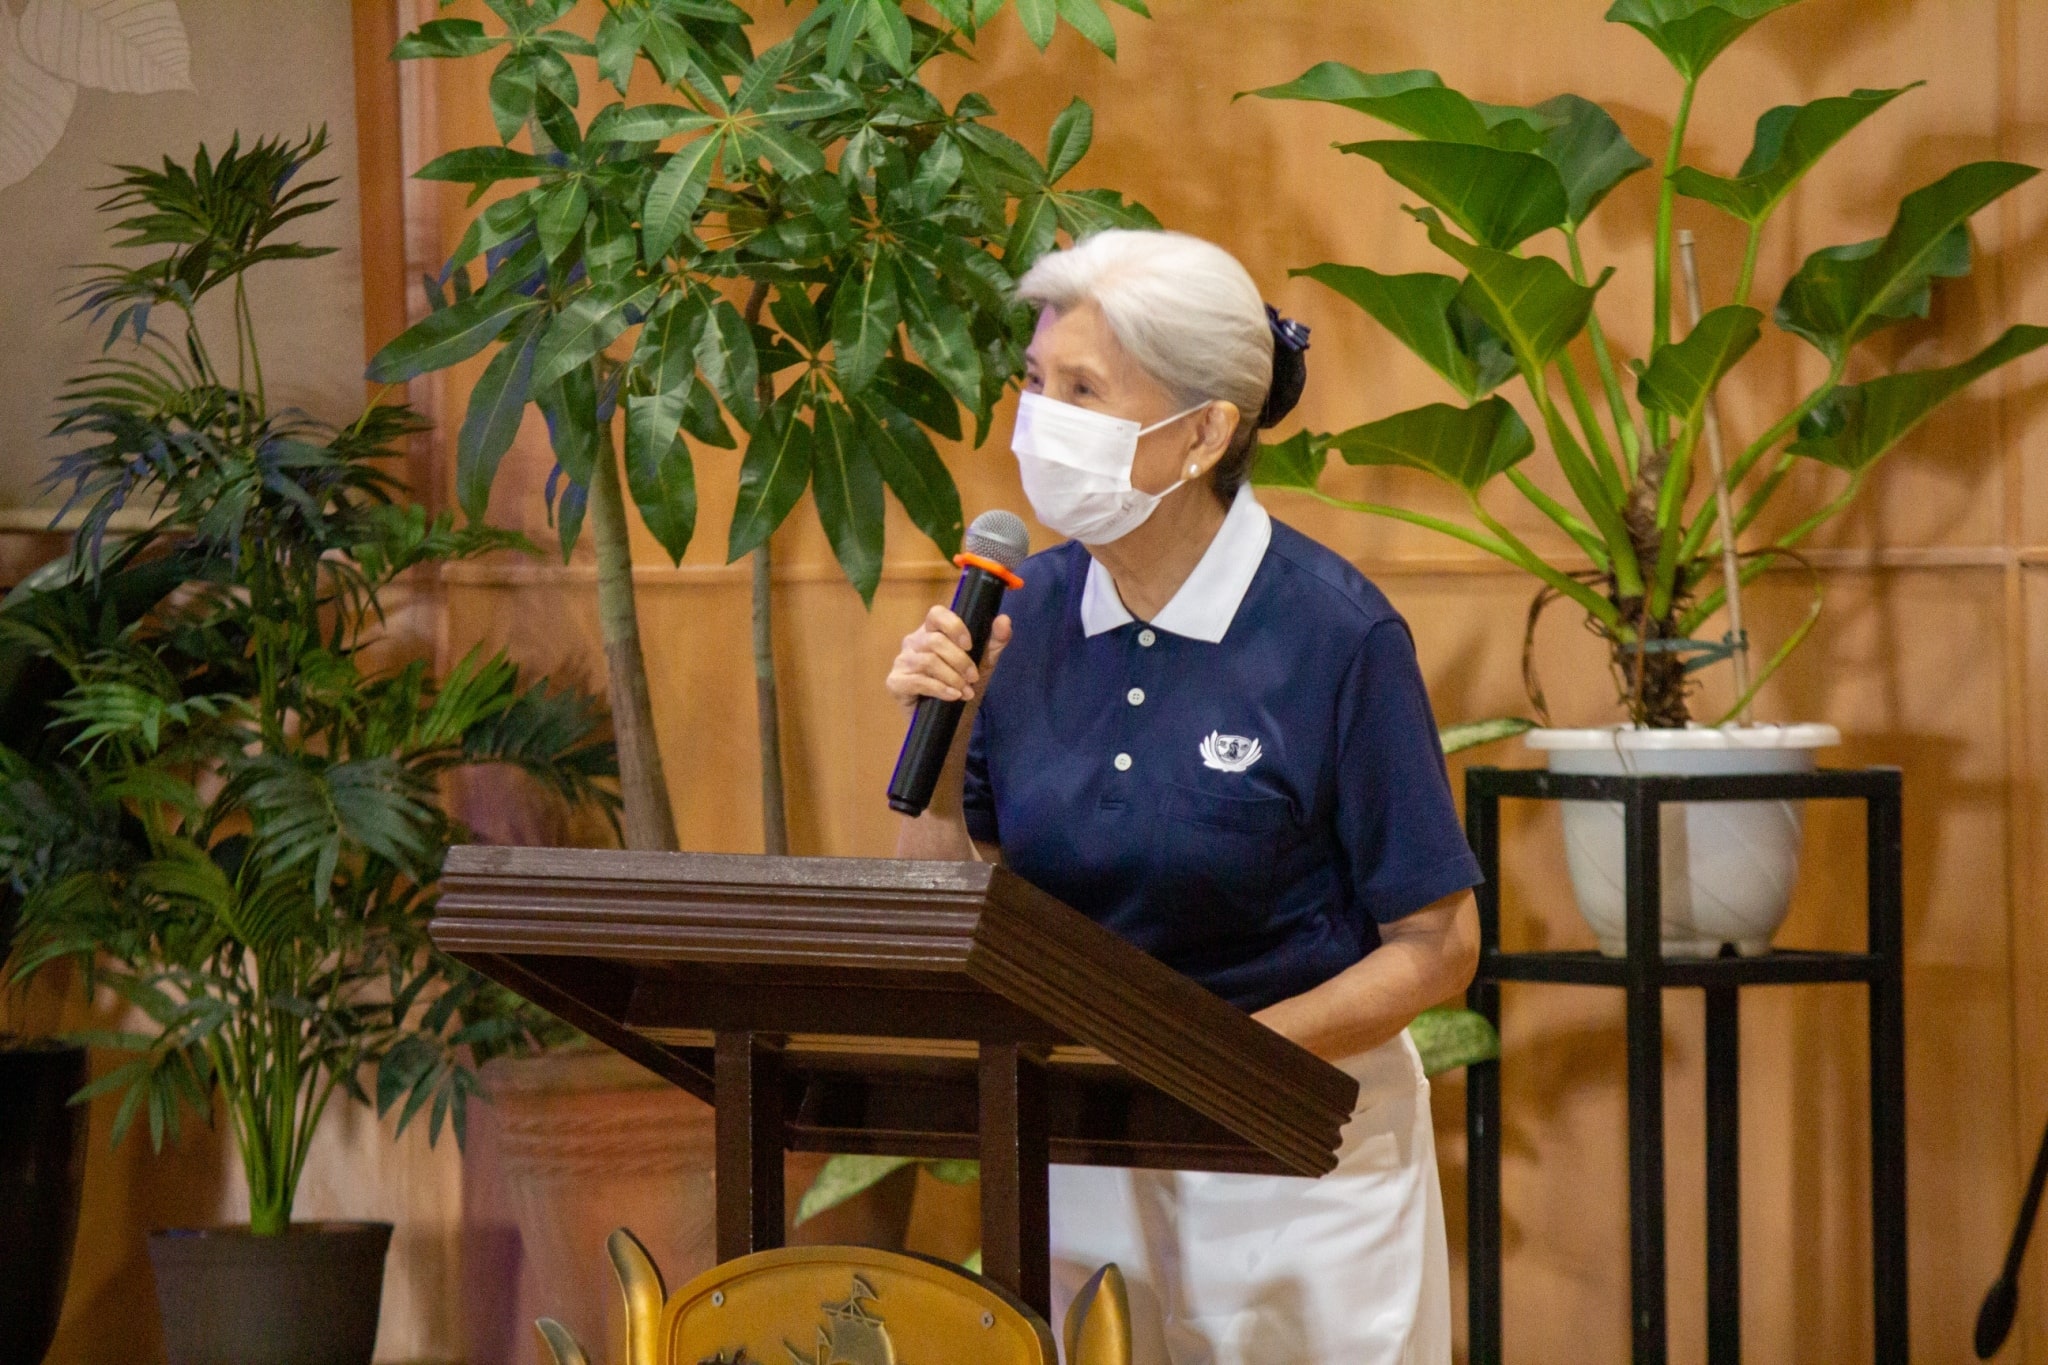 Tzu Chi Philippines’ first CEO Linda Chua suggested ways on how to fundraise for the hospital’s construction.【Photo by Marella Saldonido】